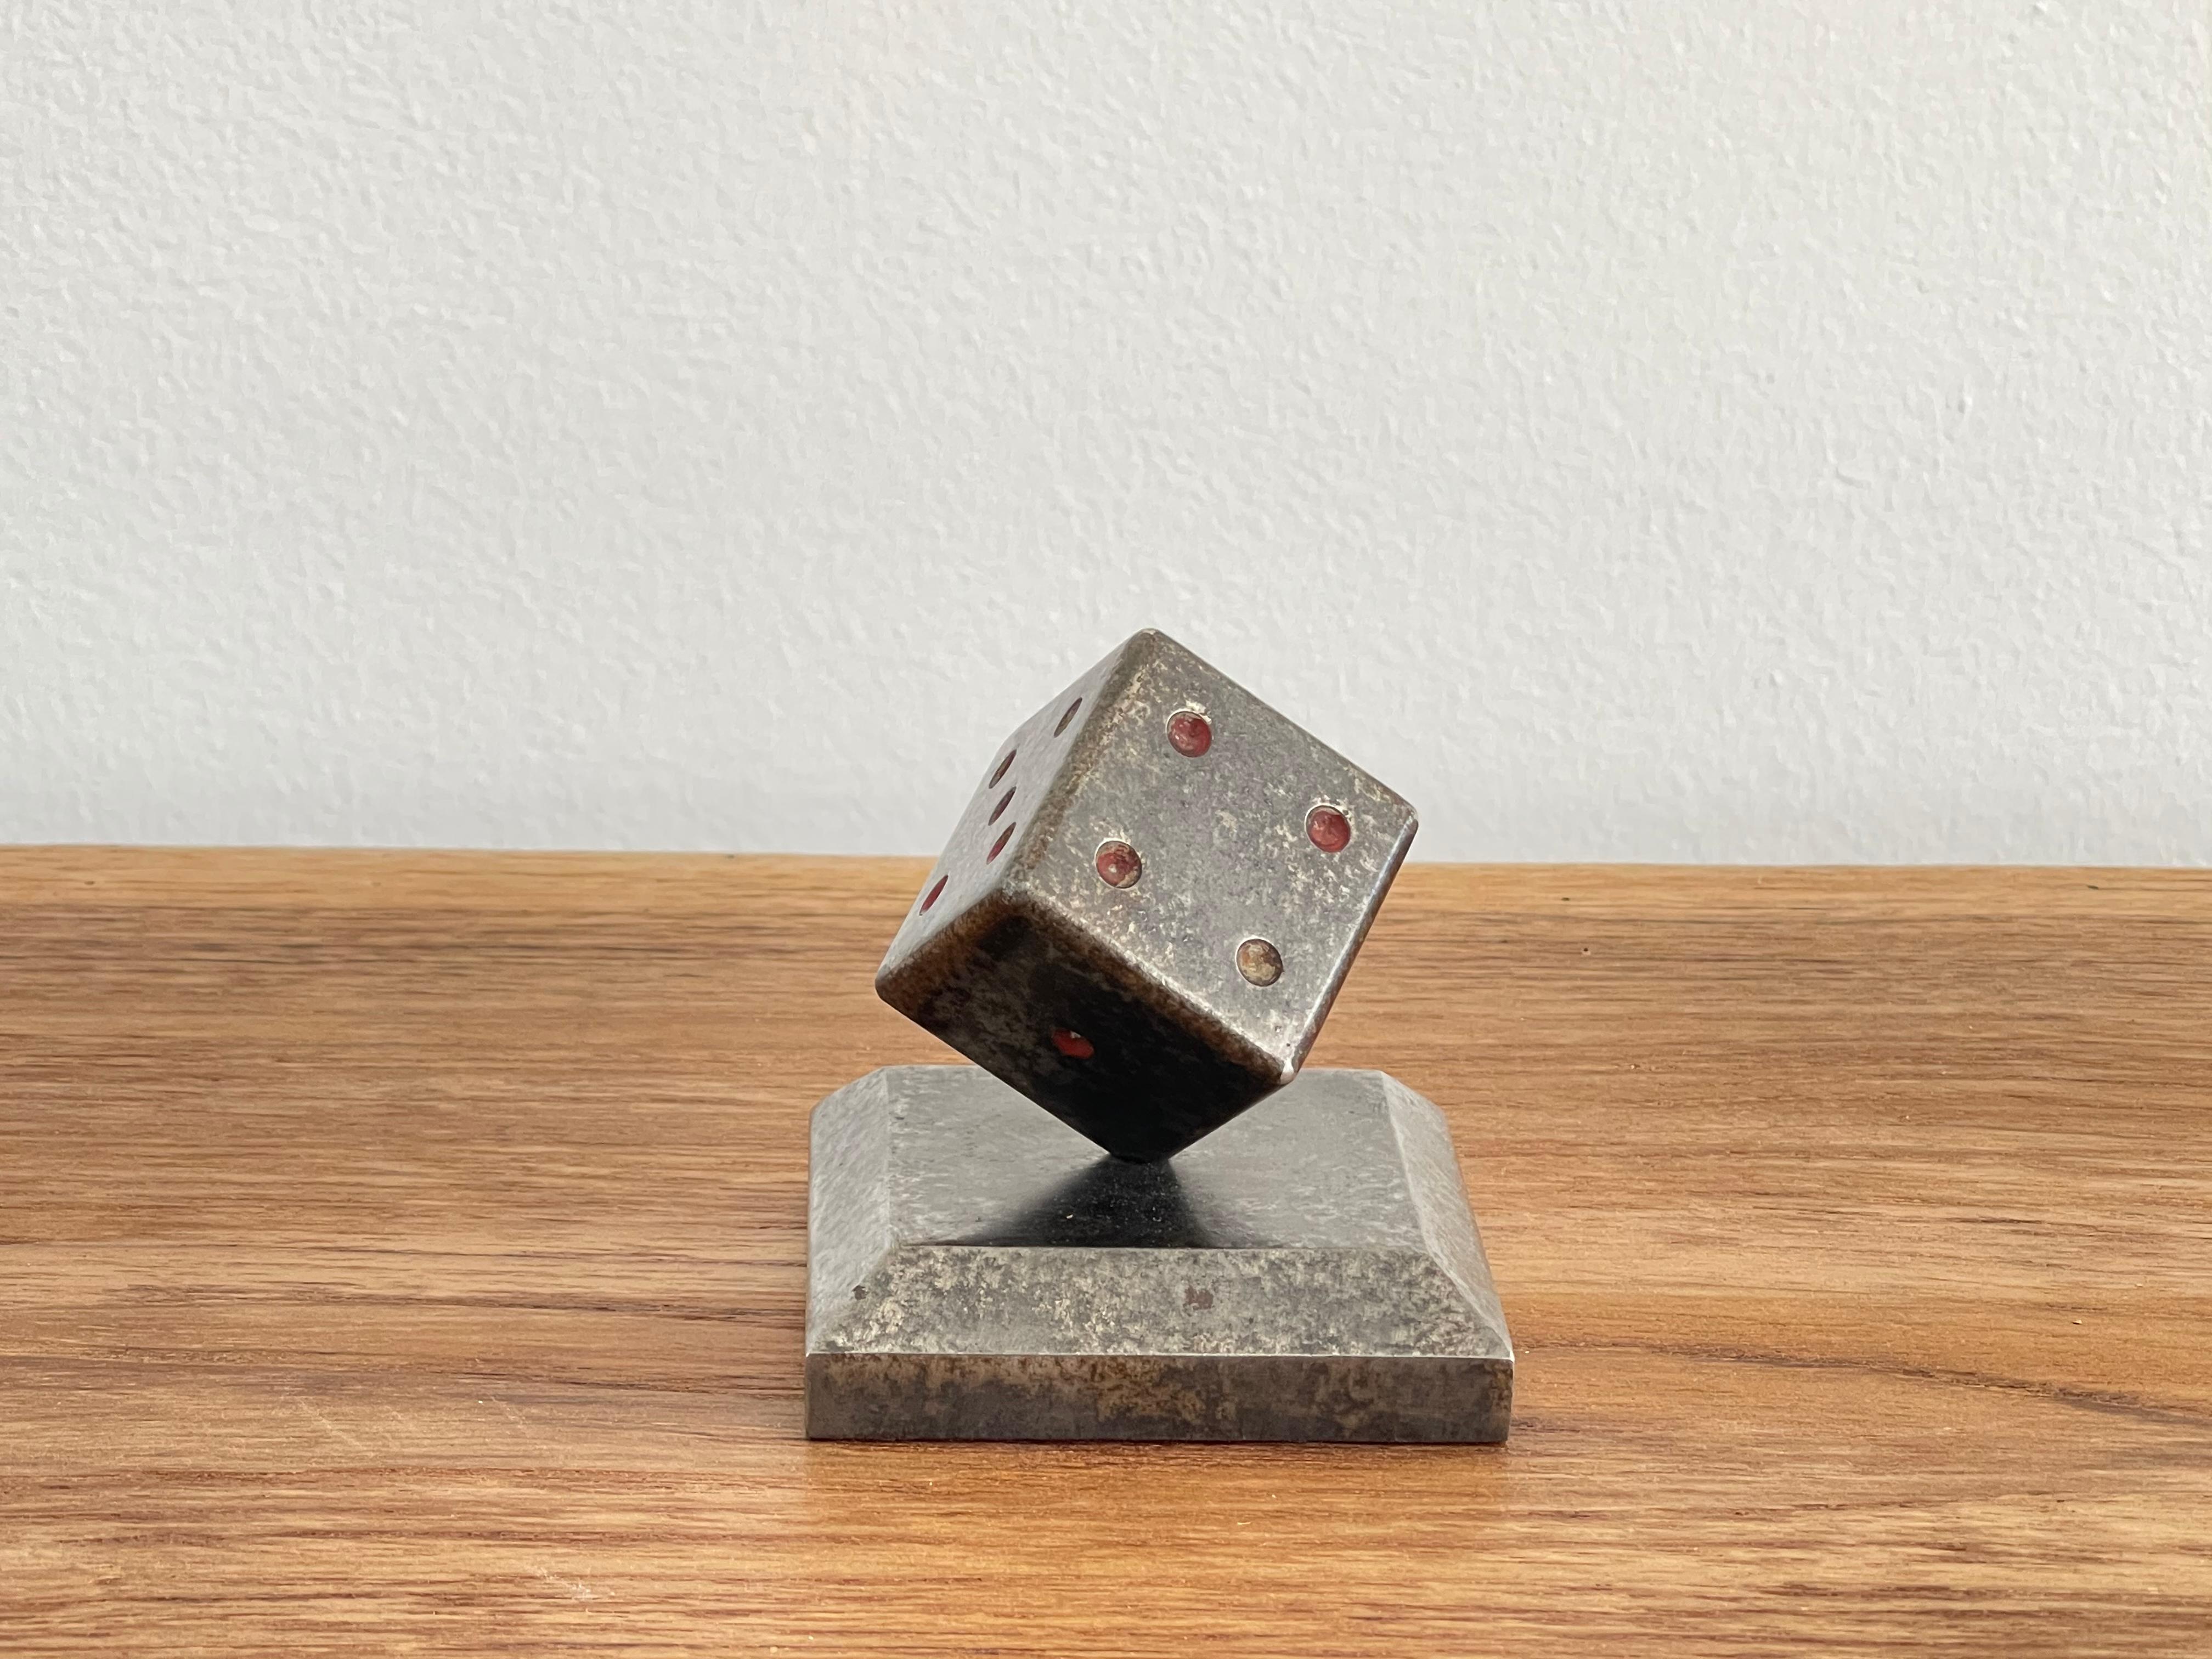 Wrought iron paperweight in shape of dice on square base with gunmetal patina. 
Heavy bronze.
Edgar Brandt circa 1930's - Famous French metal worker.